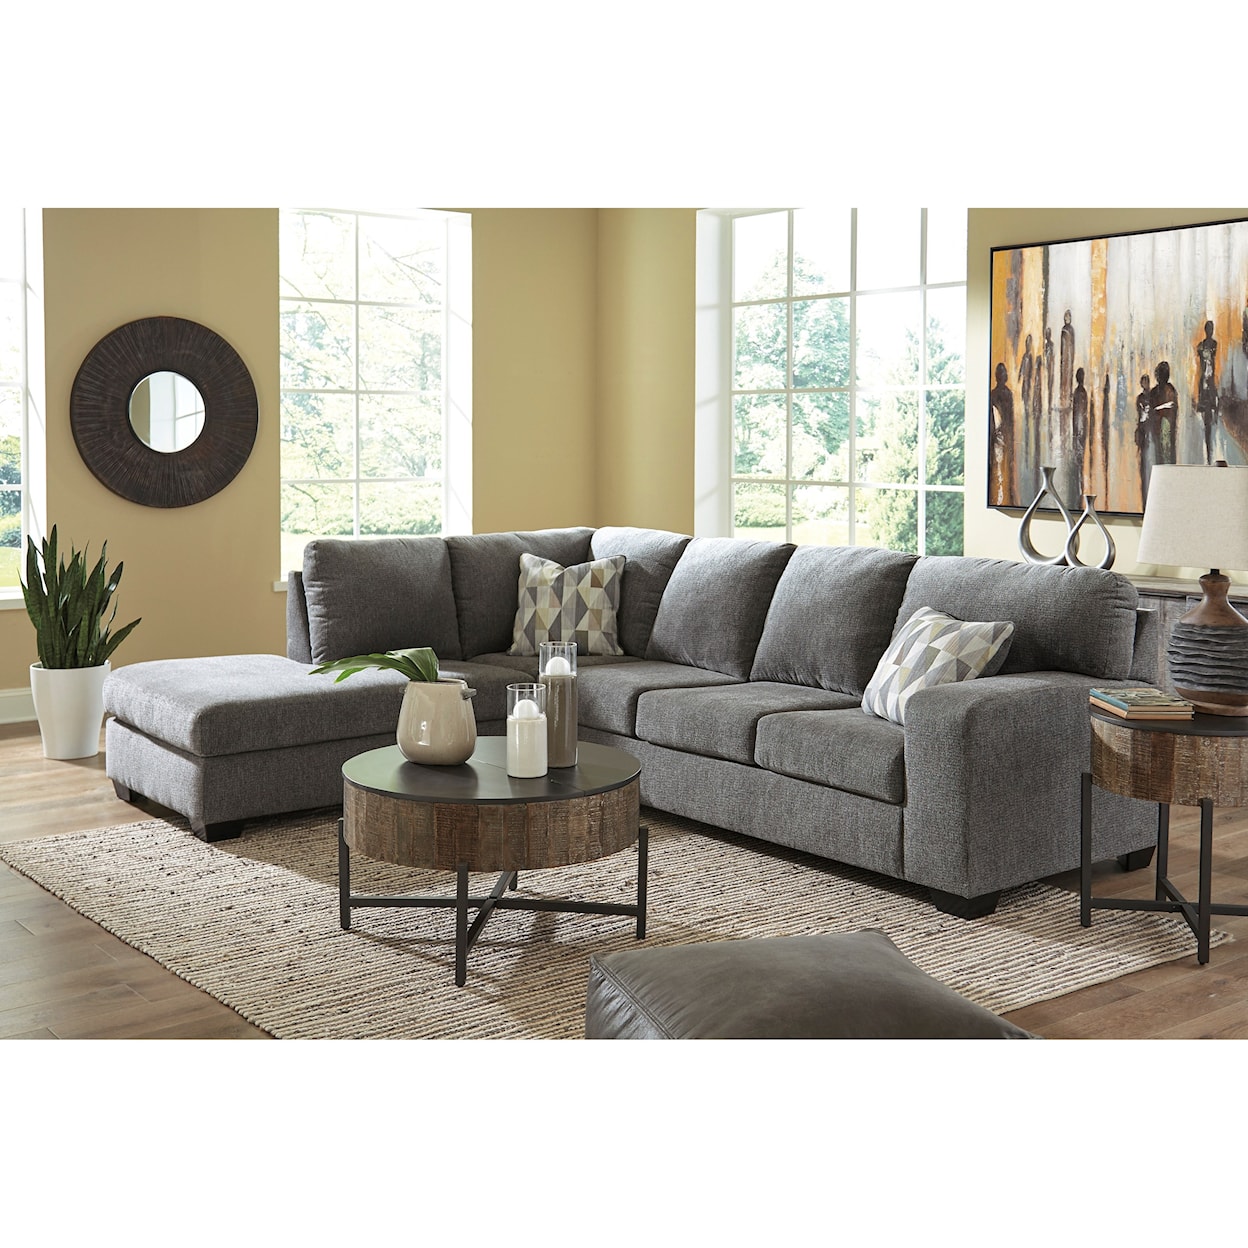 Benchcraft Dalhart 2-Piece Sectional